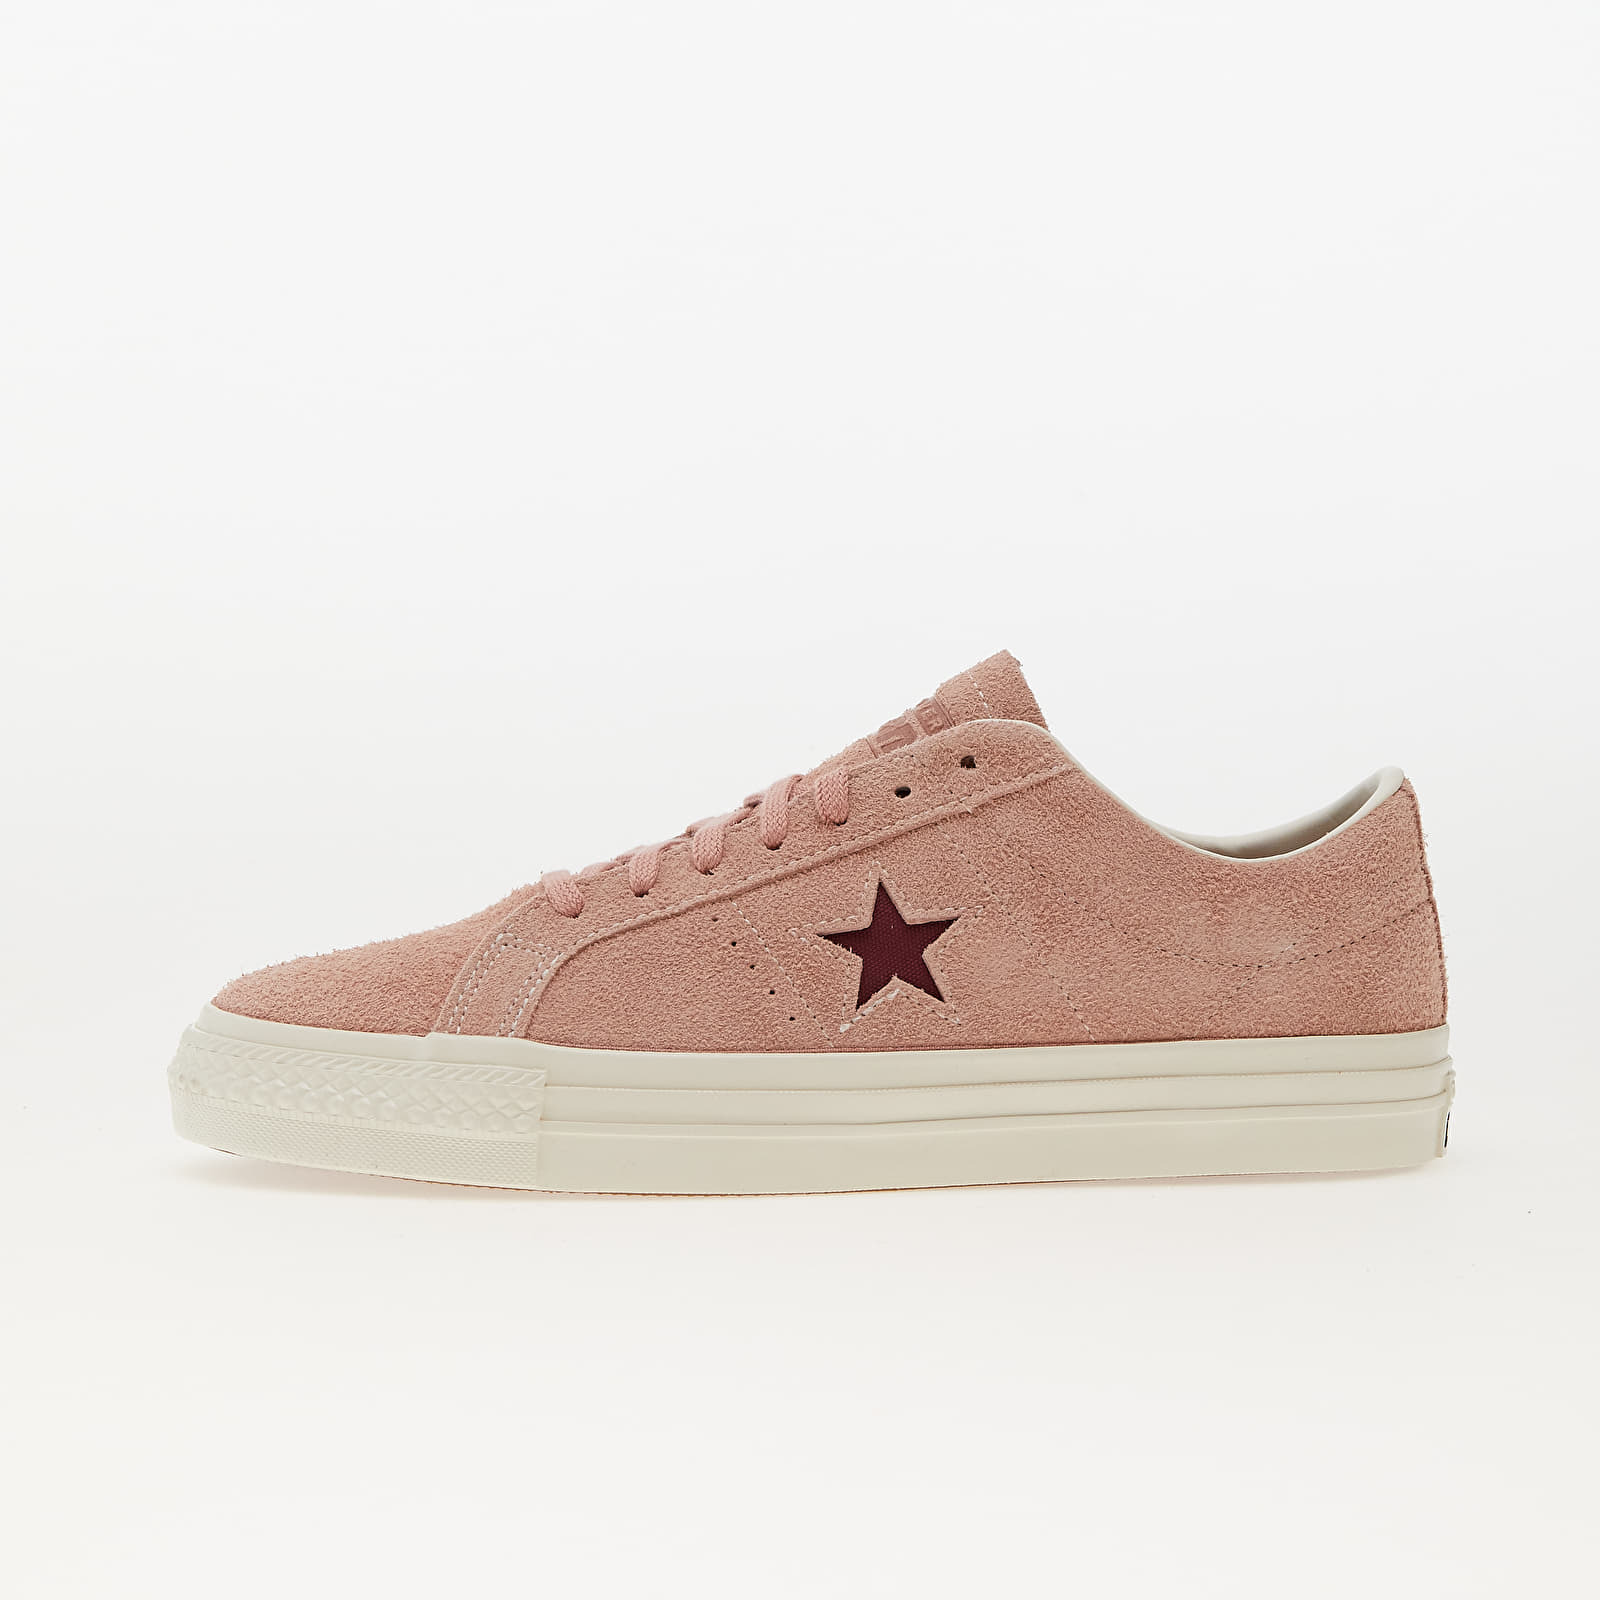 Converse - one star pro canyon dusk/ cherry vision